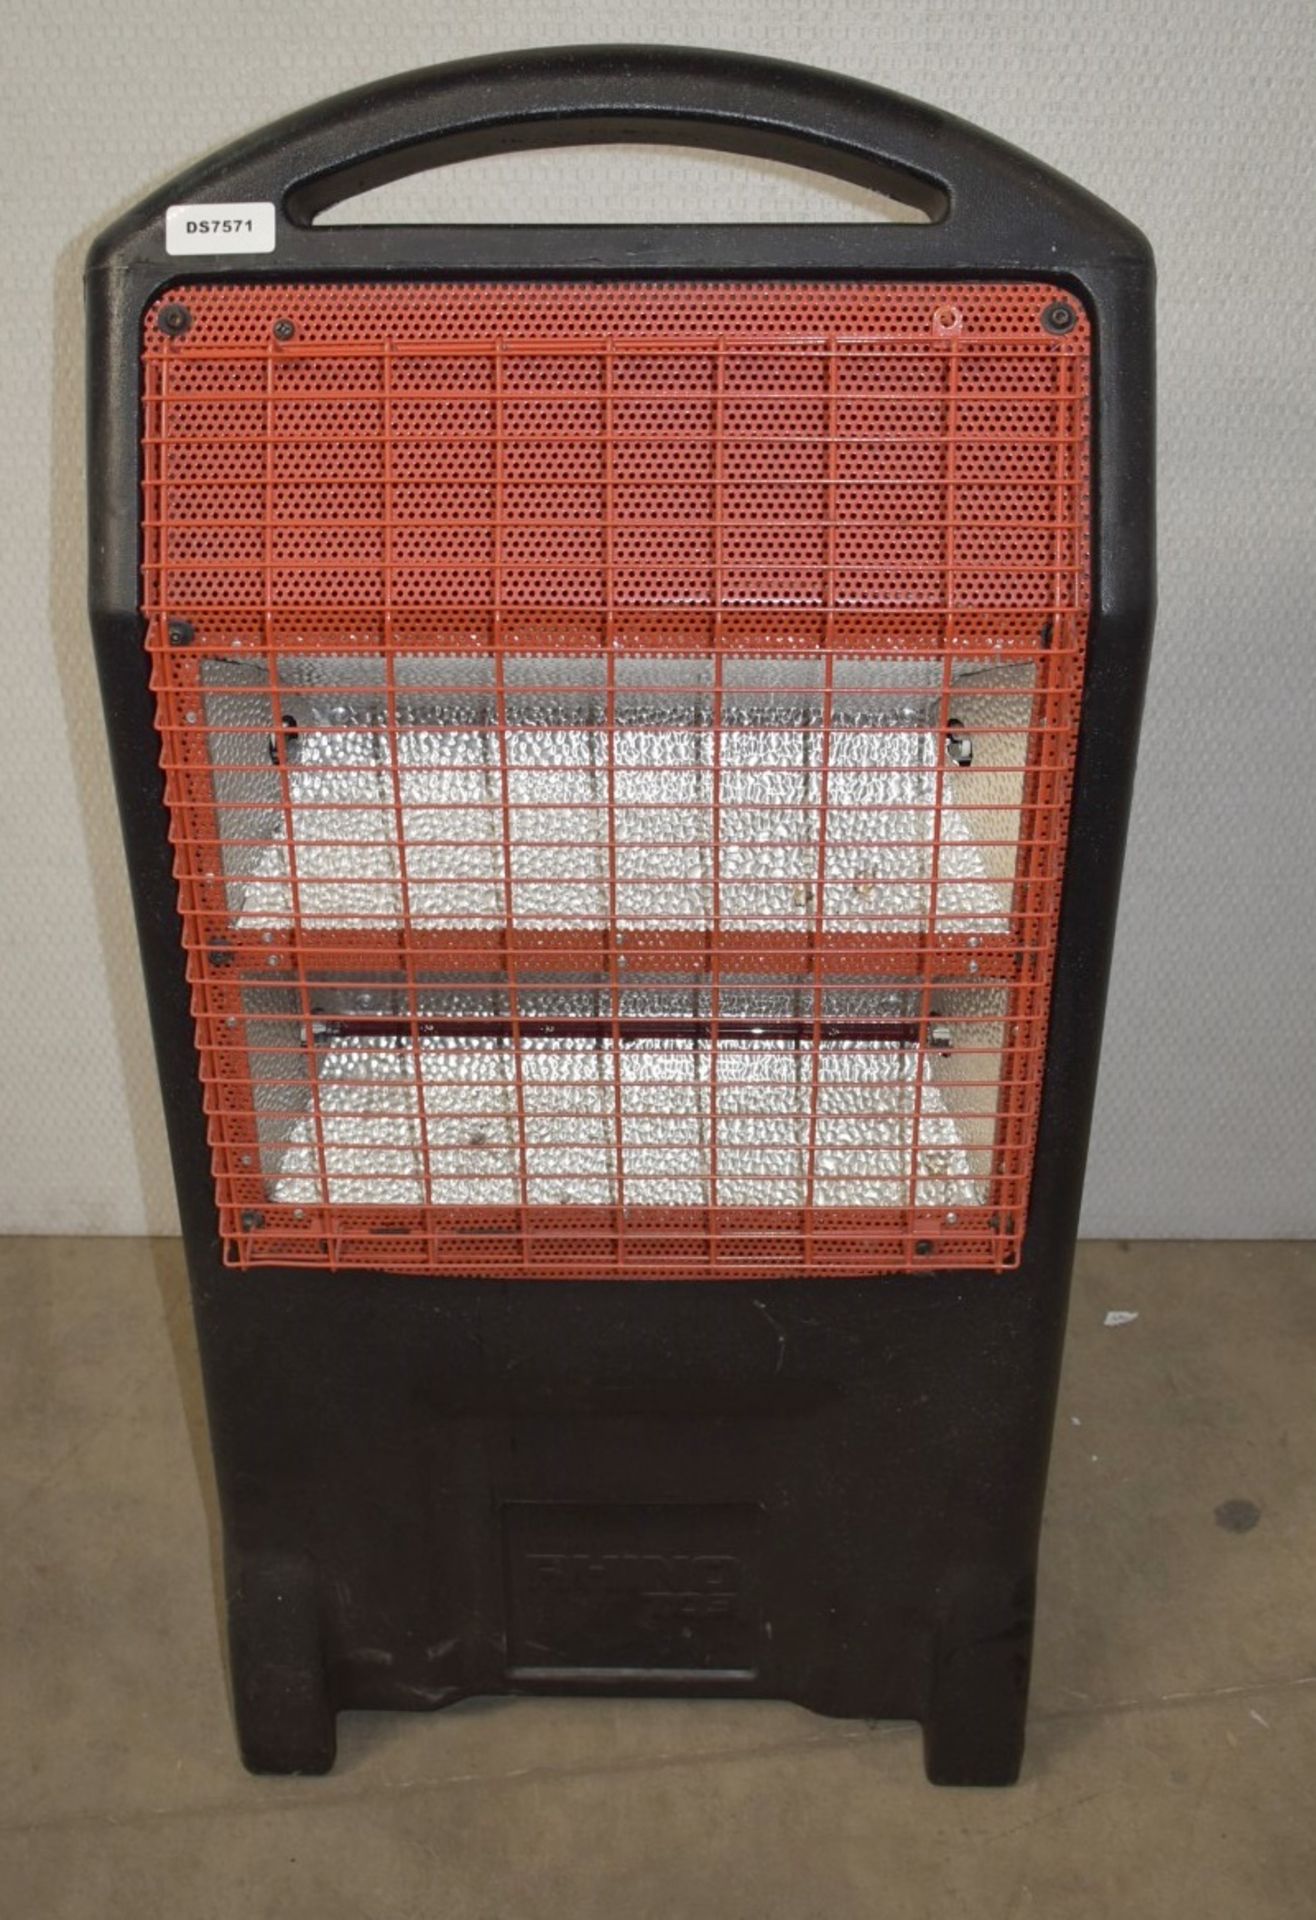 1 x RHINO TQ3 Industrial Infrared Heater 2.8kW 230V - Original RRP £199.00 - Ref: DS7571 ALT - CL011 - Image 3 of 4